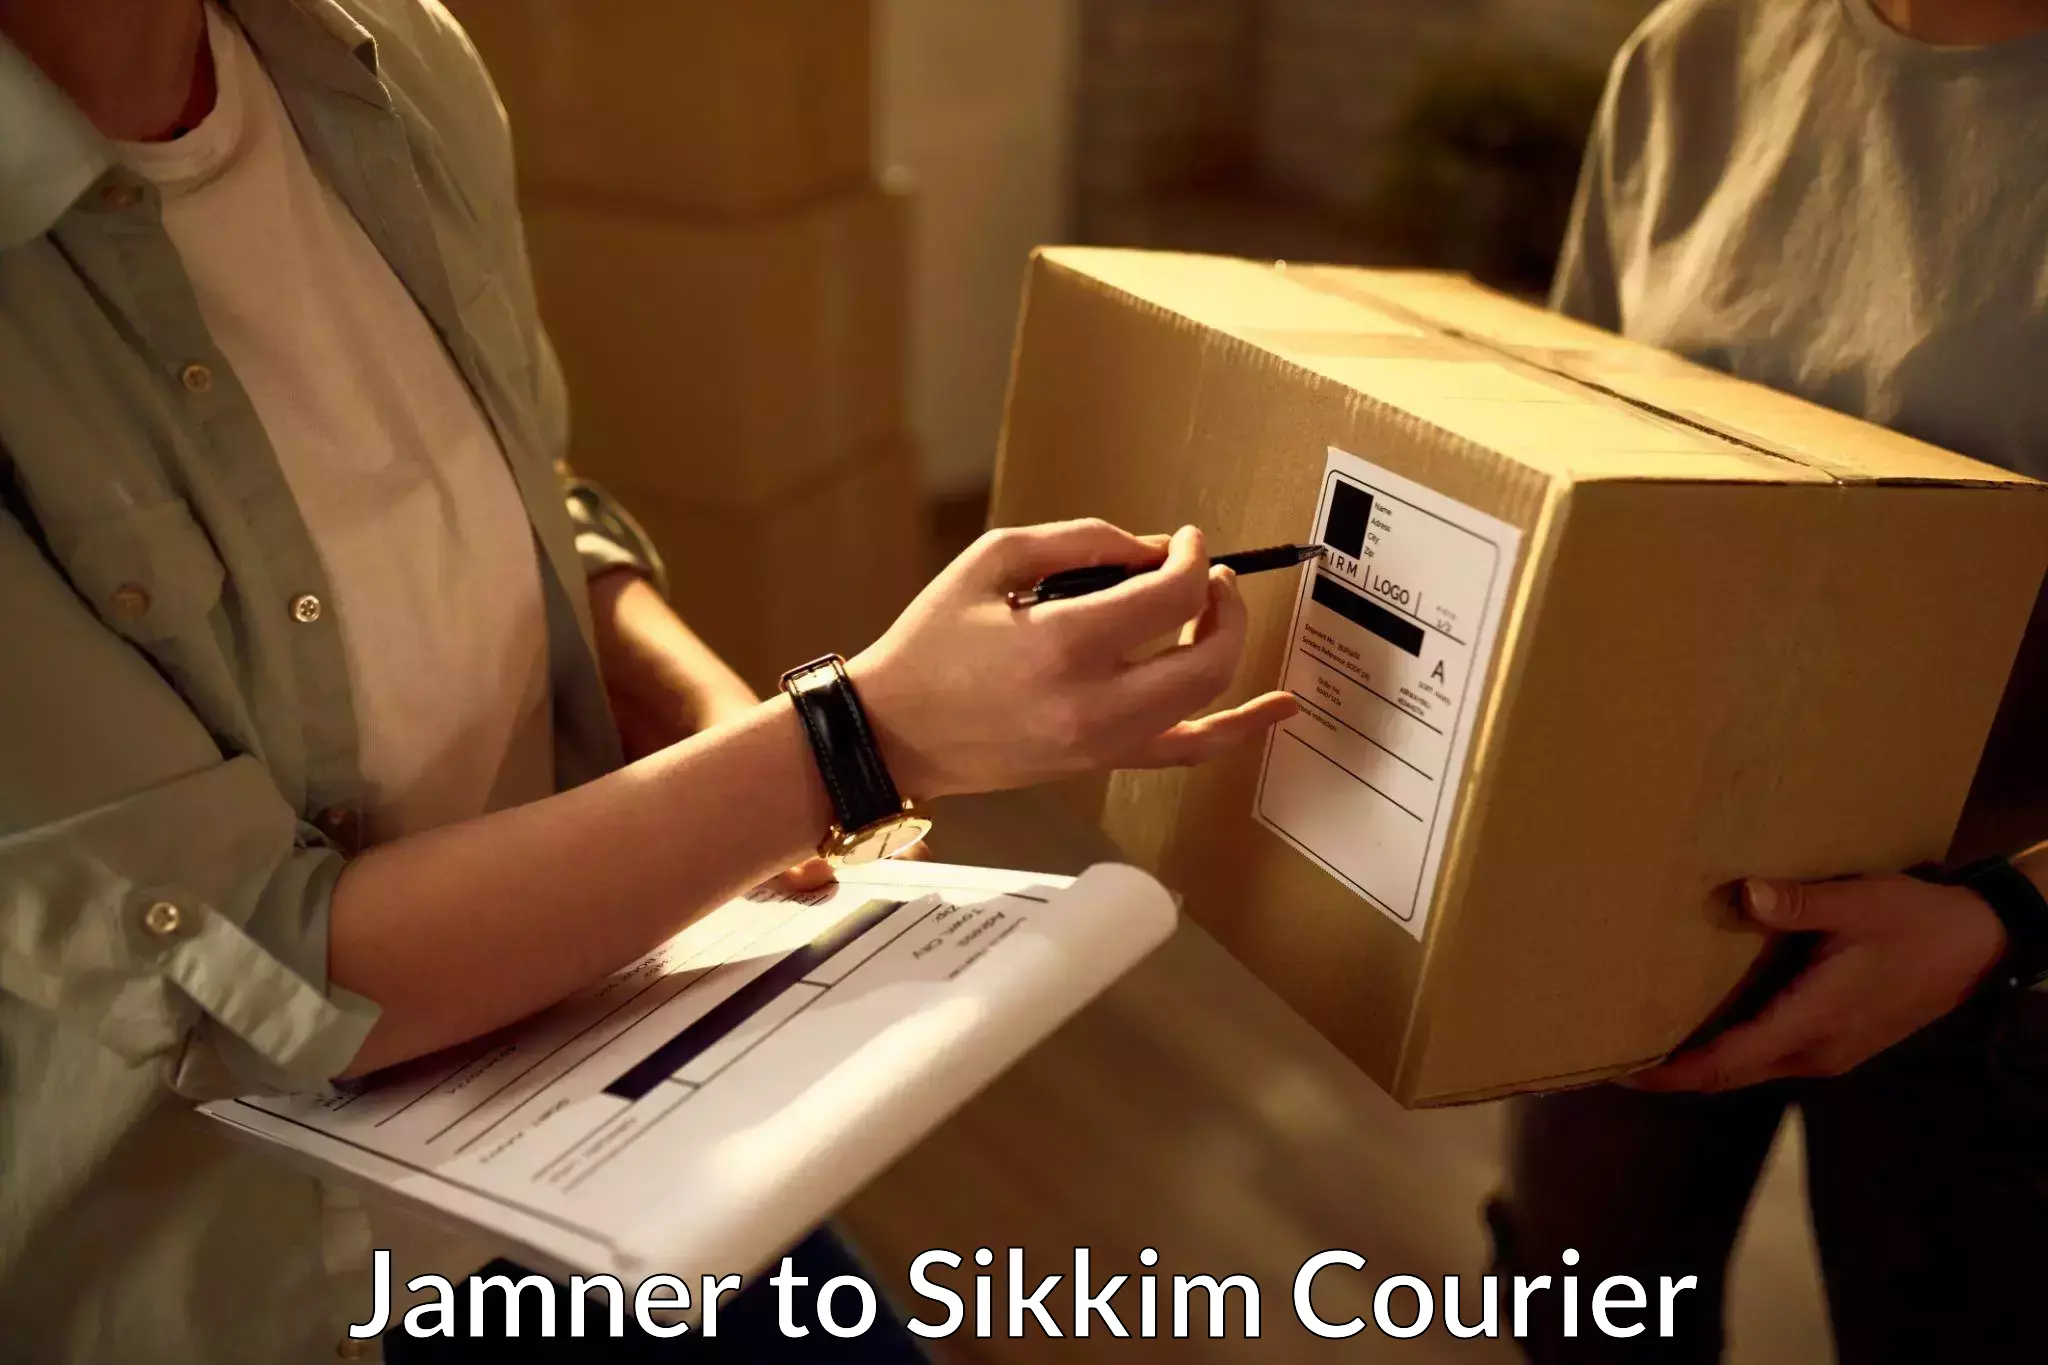 24/7 courier service Jamner to Pelling